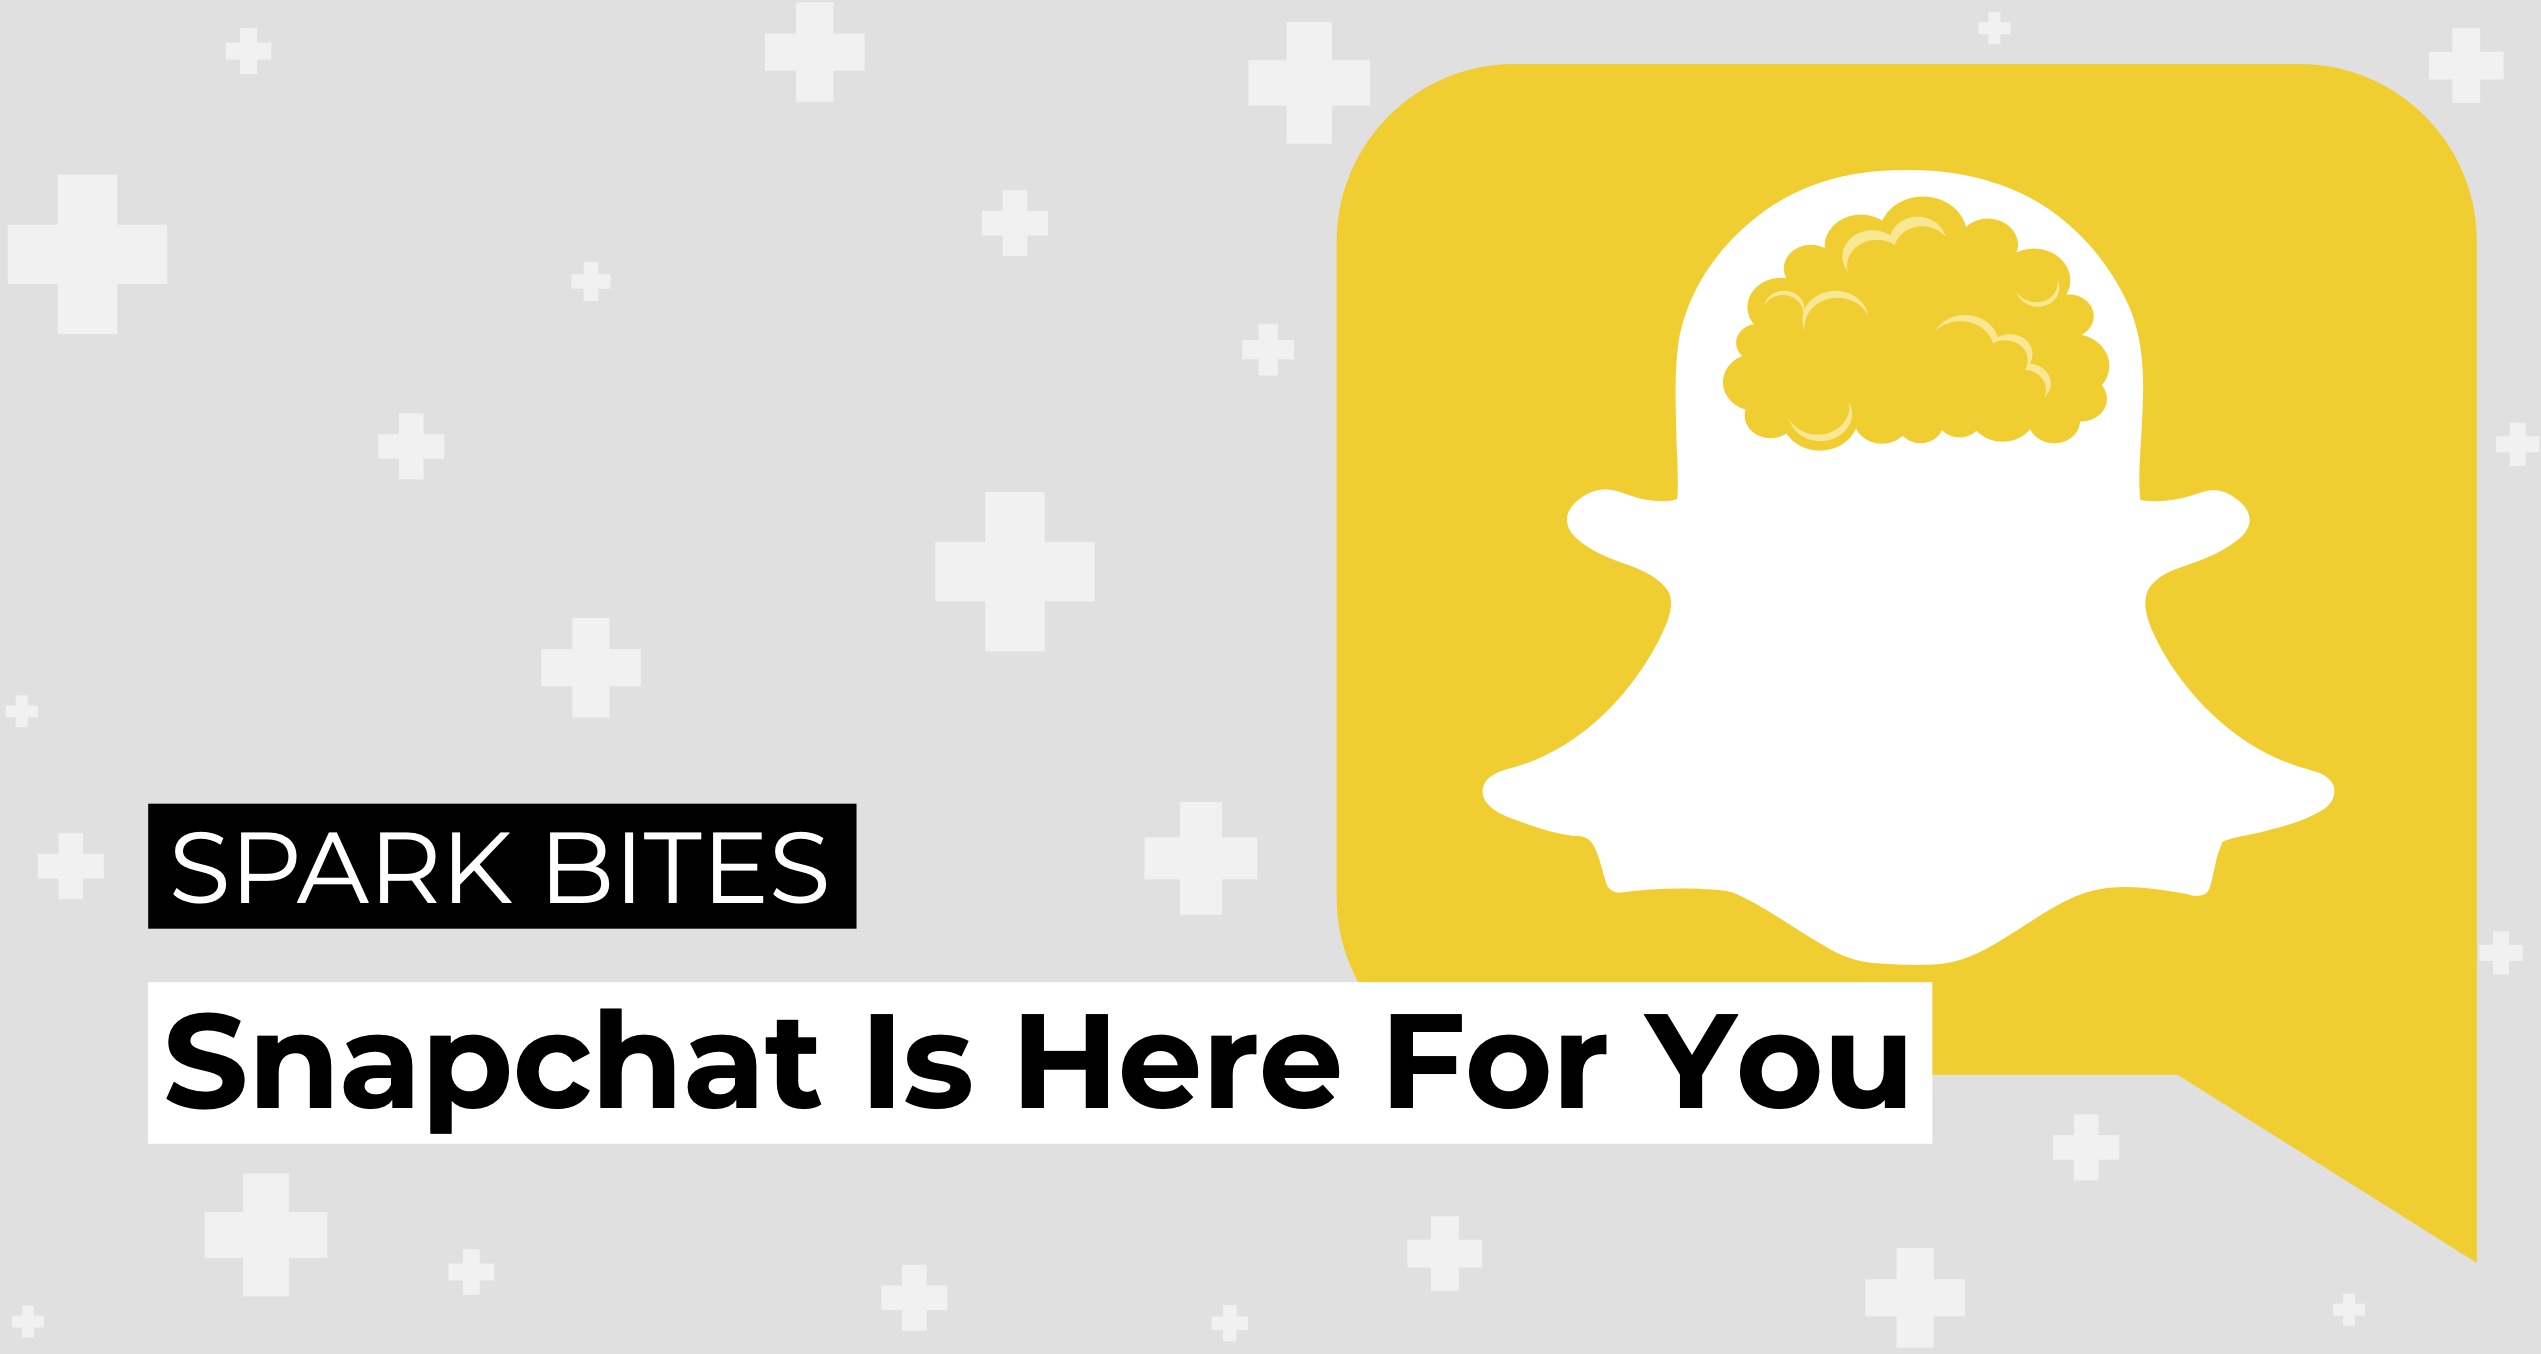 Snapchat released "Here For You" early